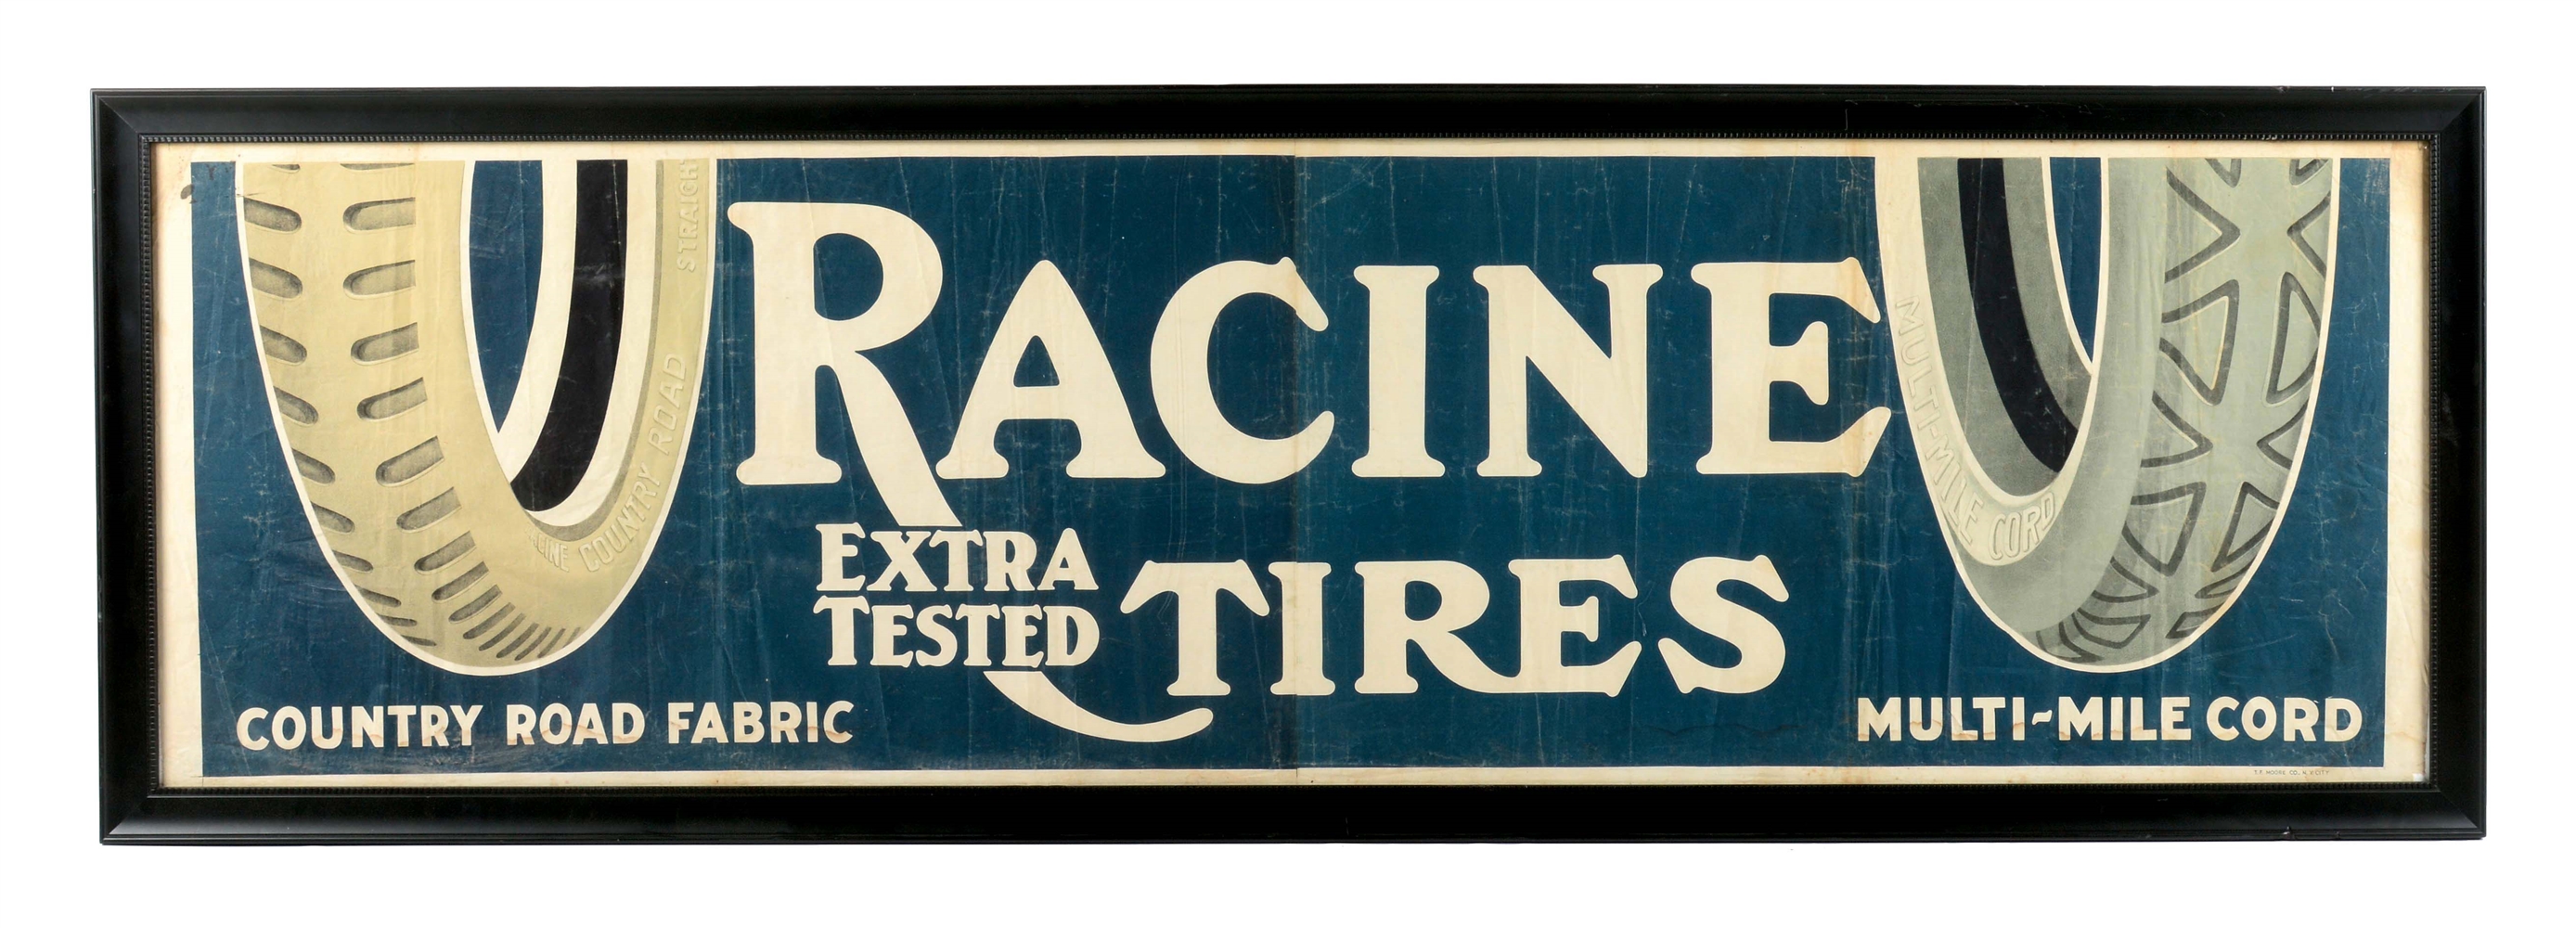 RACINE "EXTRA TESTED" TIRES FRAMED CLOTH SERVICE STATION BANNER W/ TIRE GRAPHICS. 